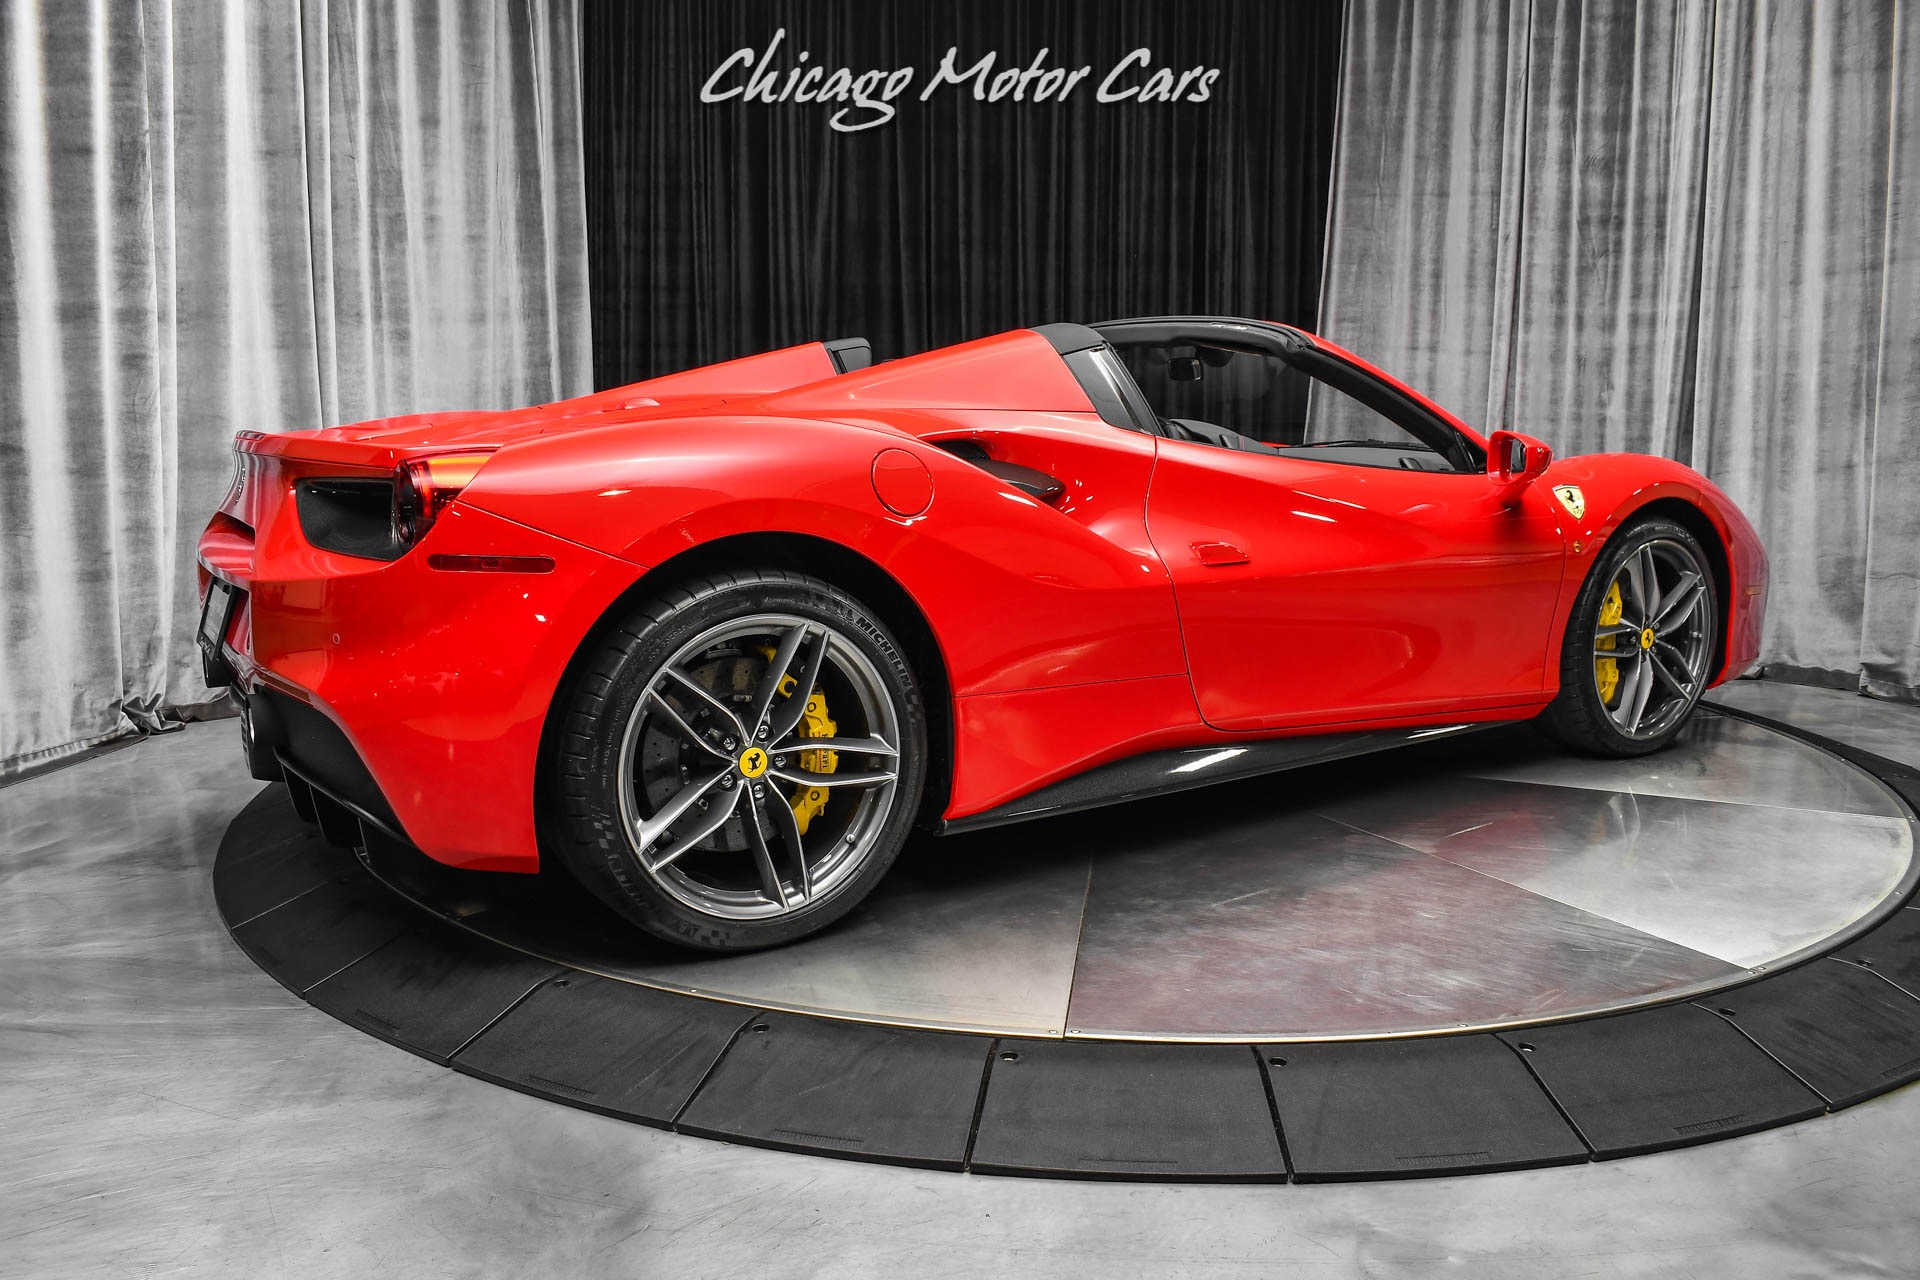 Used-2019-Ferrari-488-Spider-Only-1700-Miles-Carbon-Fiber-Everywhere-Optioned-Extremely-Well